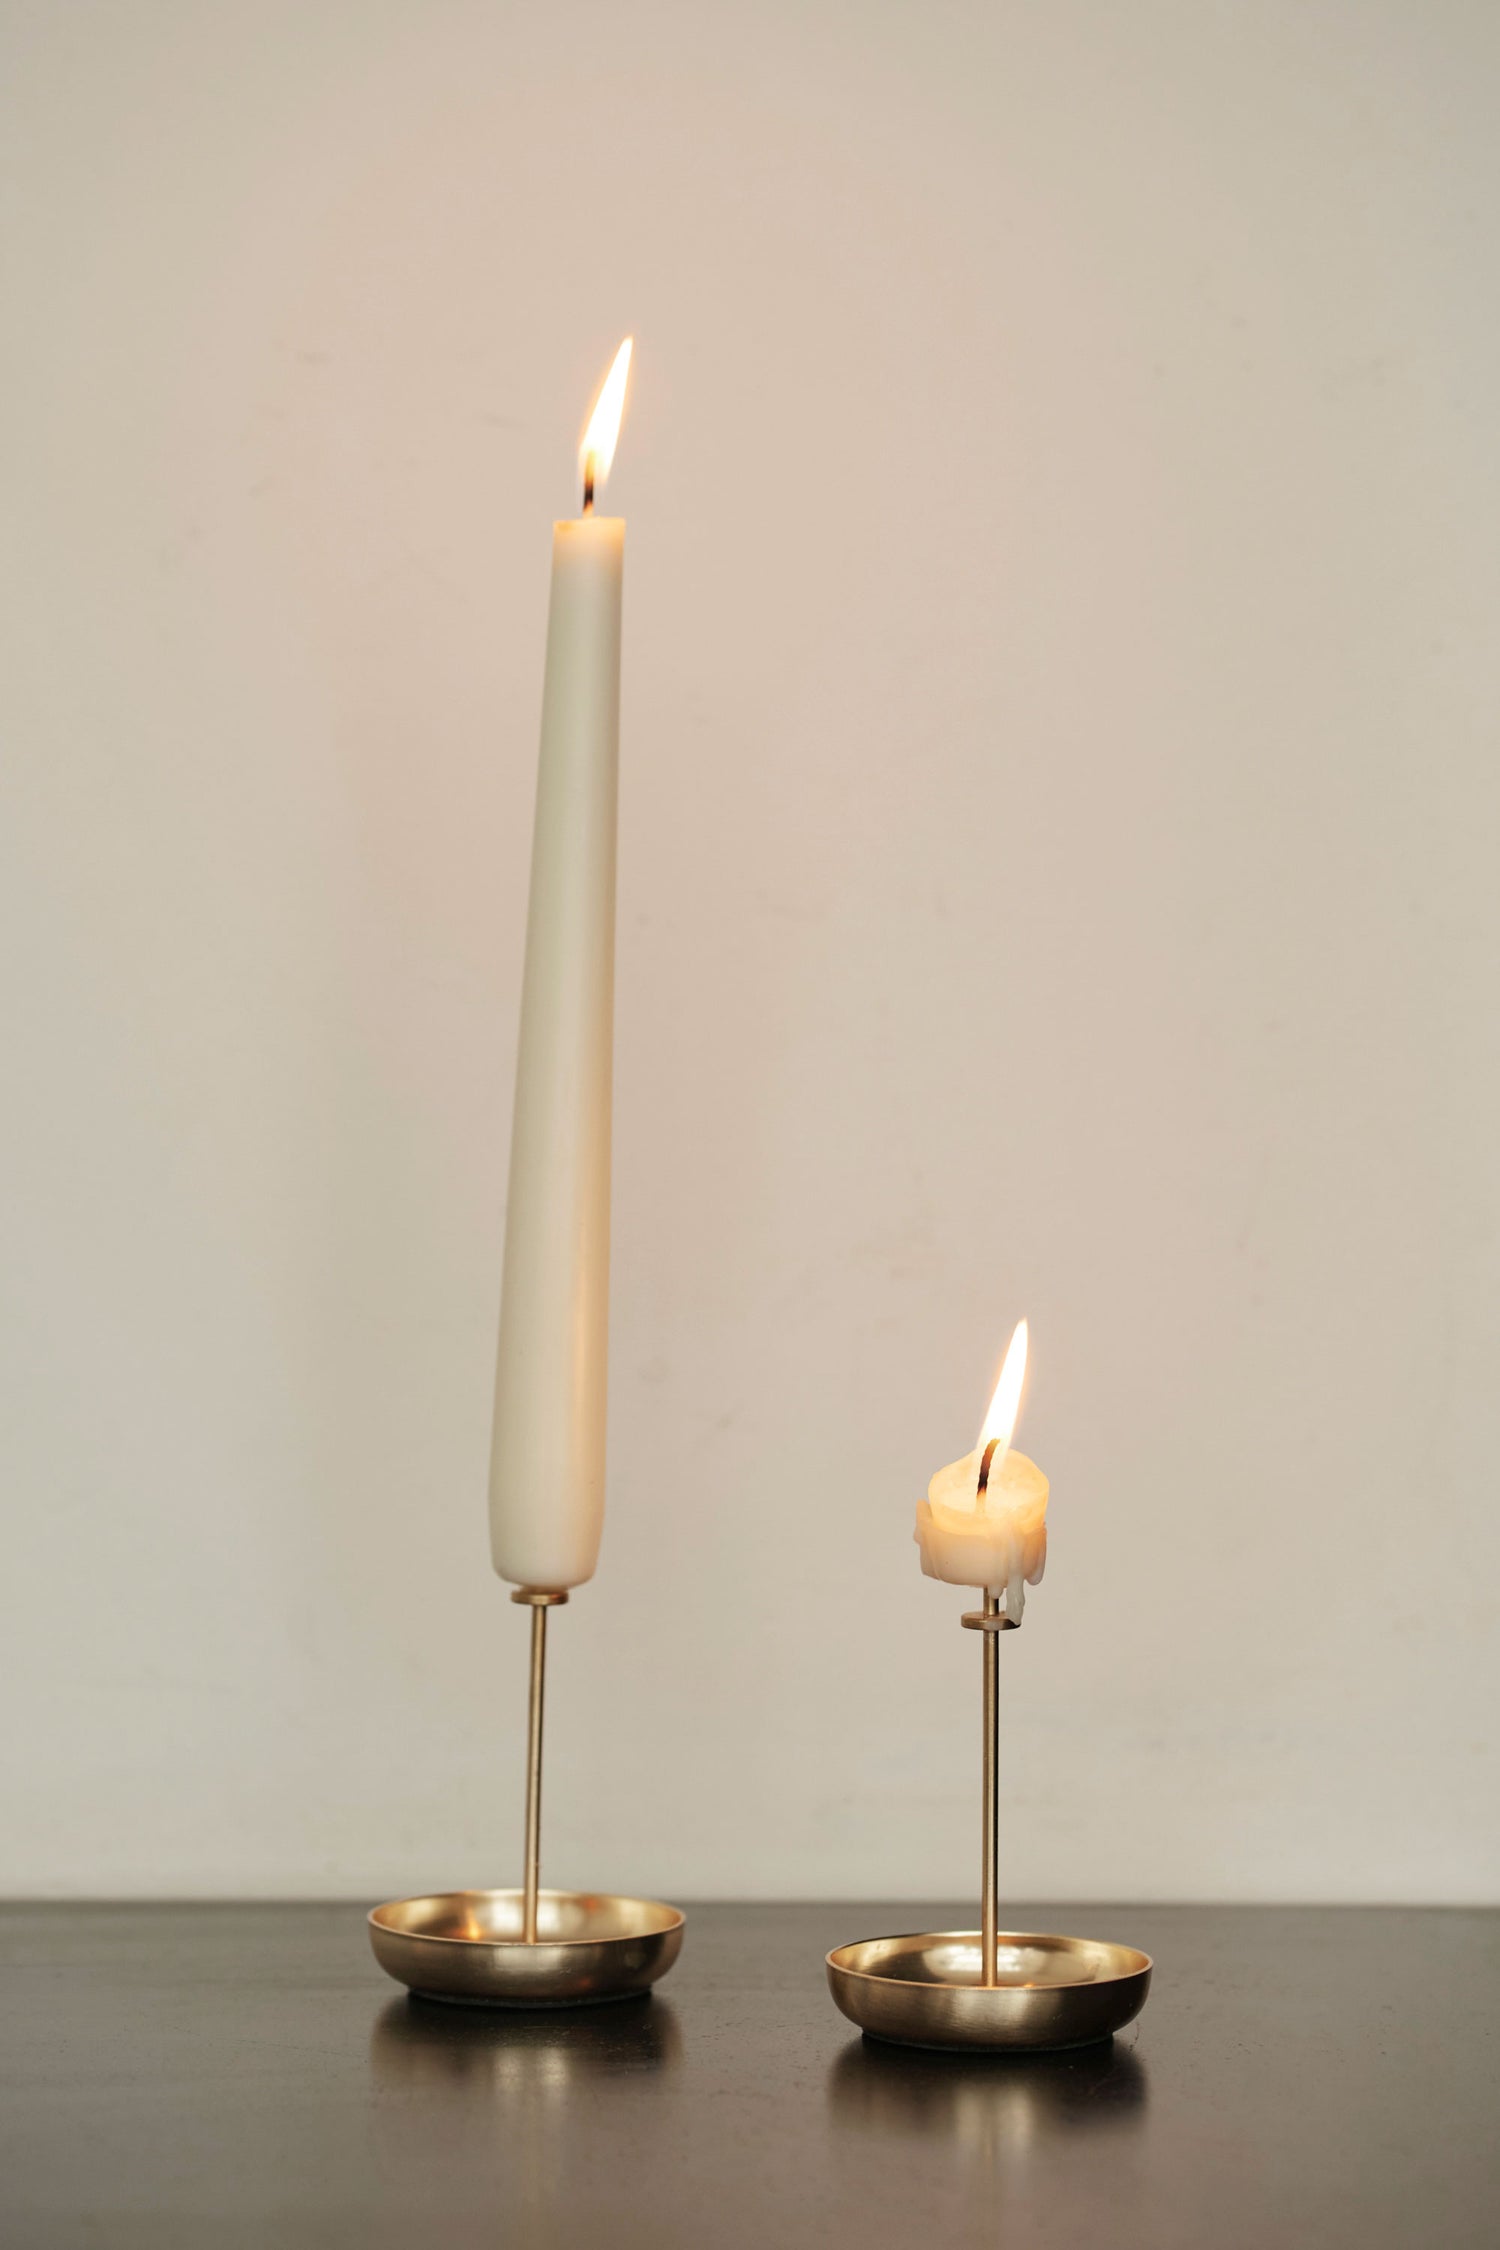 ENO Studio Micro Candle Pin (set of 2) - Golden Brass Candleholders